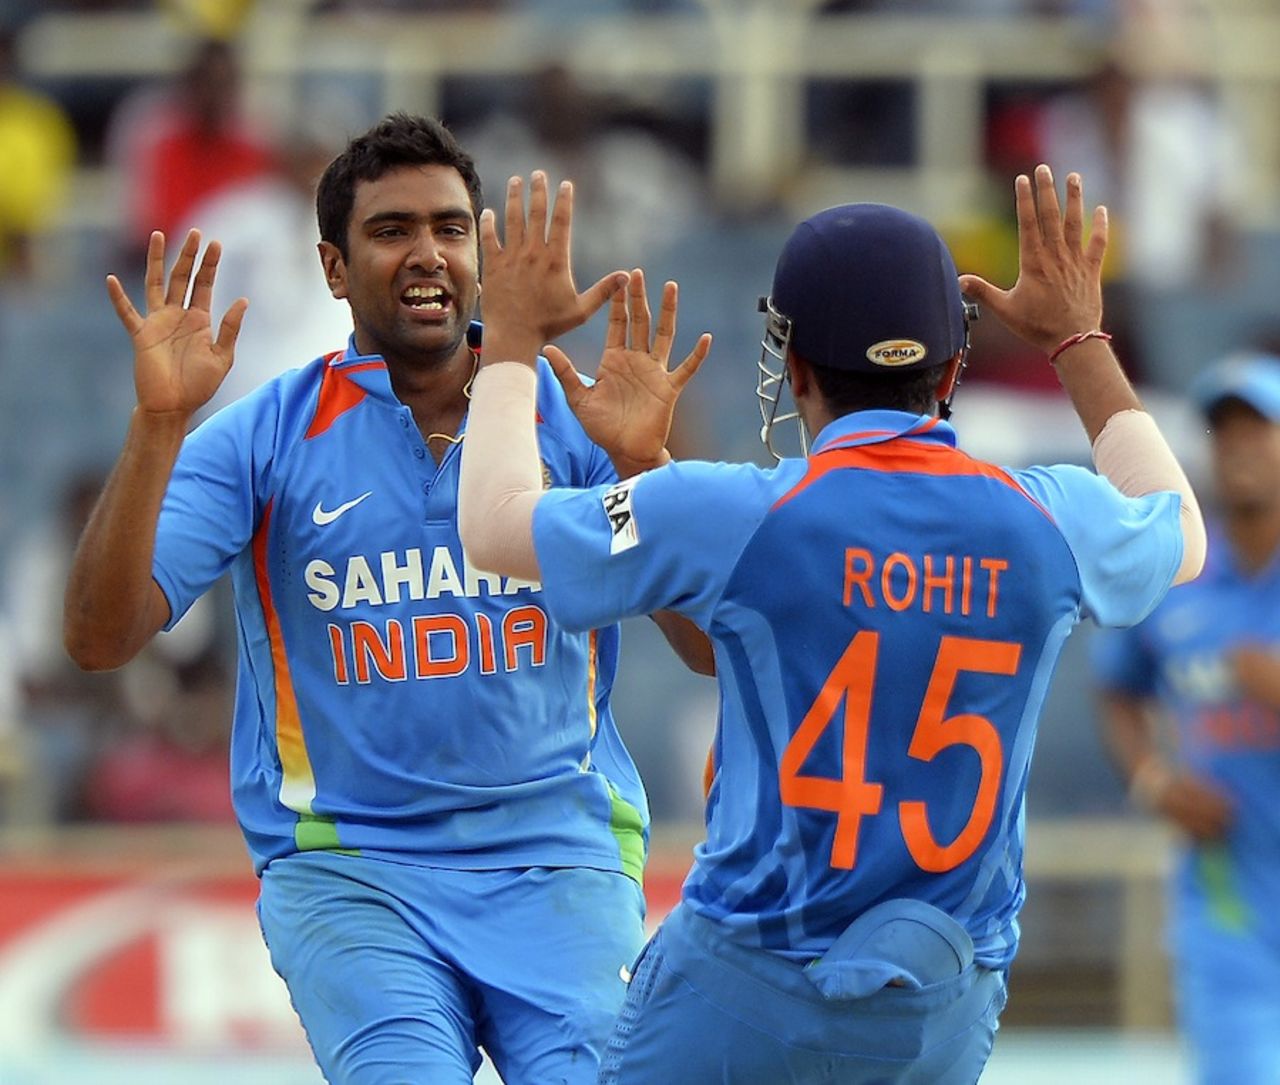 R Ashwin struck twice in his second spell, West Indies v India, West Indies tri-series, Kingston, June 30, 2013